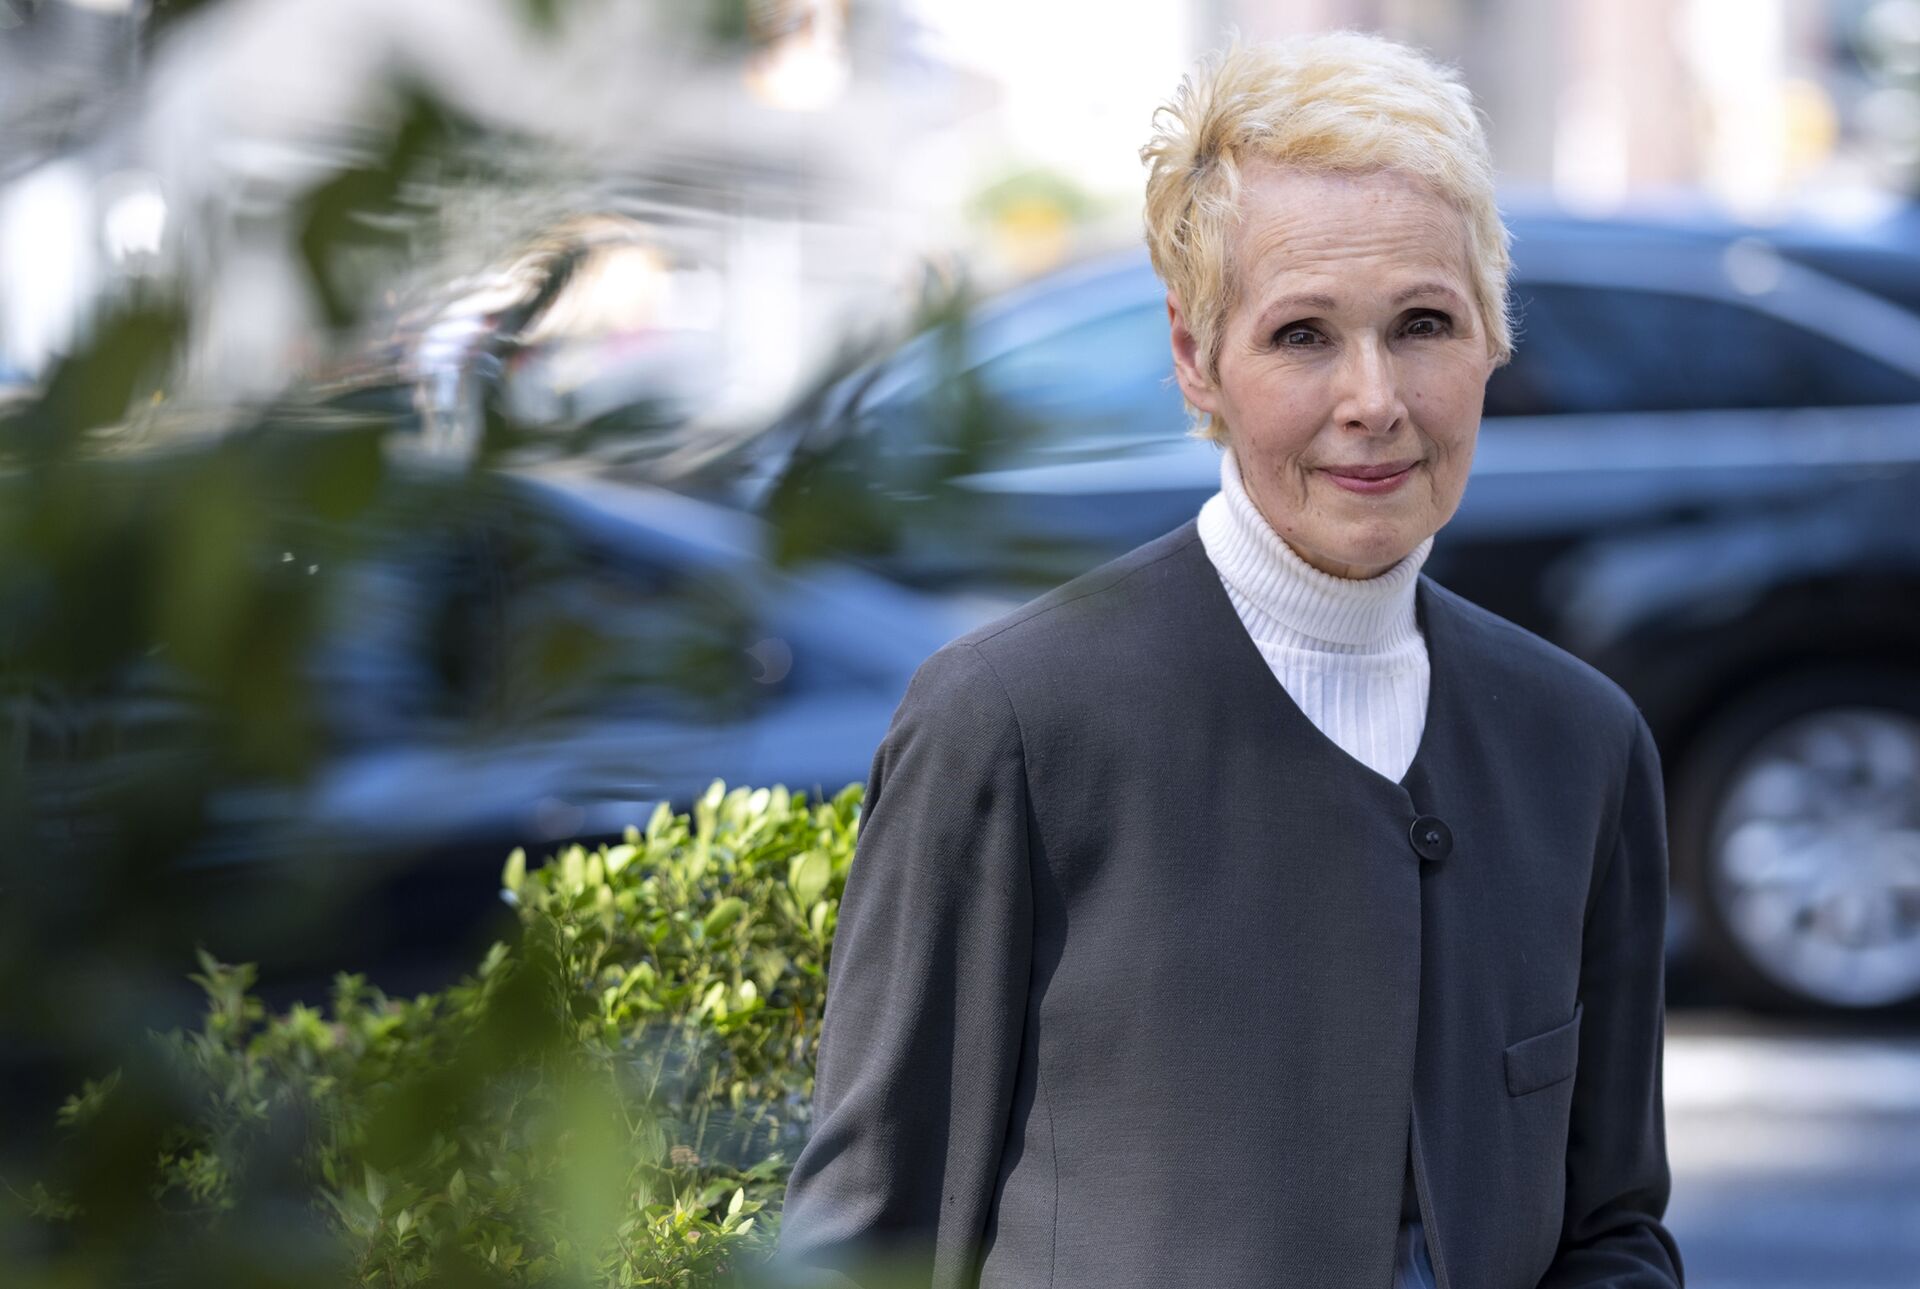 E. Jean Carroll is photographed, Sunday, June 23, 2019, in New York. Carroll, a New York-based advice columnist, claims Donald Trump sexually assaulted her in a dressing room at a Manhattan department store in the mid-1990s. Trump denies knowing Carroll. (AP Photo/Craig Ruttle) - Sputnik International, 1920, 16.09.2021